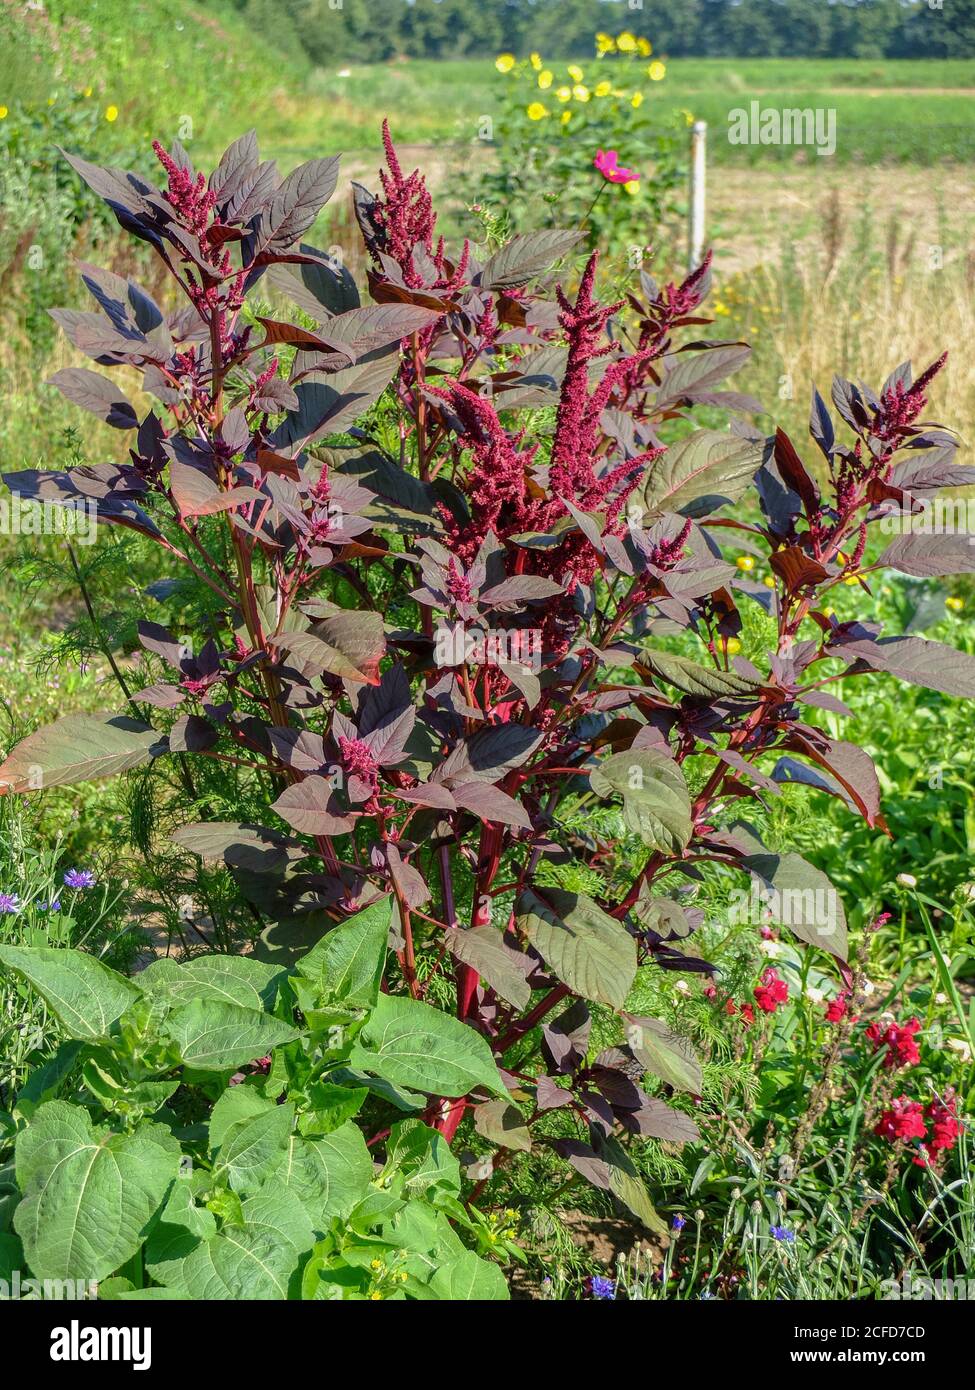 Vegetable Amaranth - Red-leaved foxtail (Amaranthus) grows in the garden Stock Photo